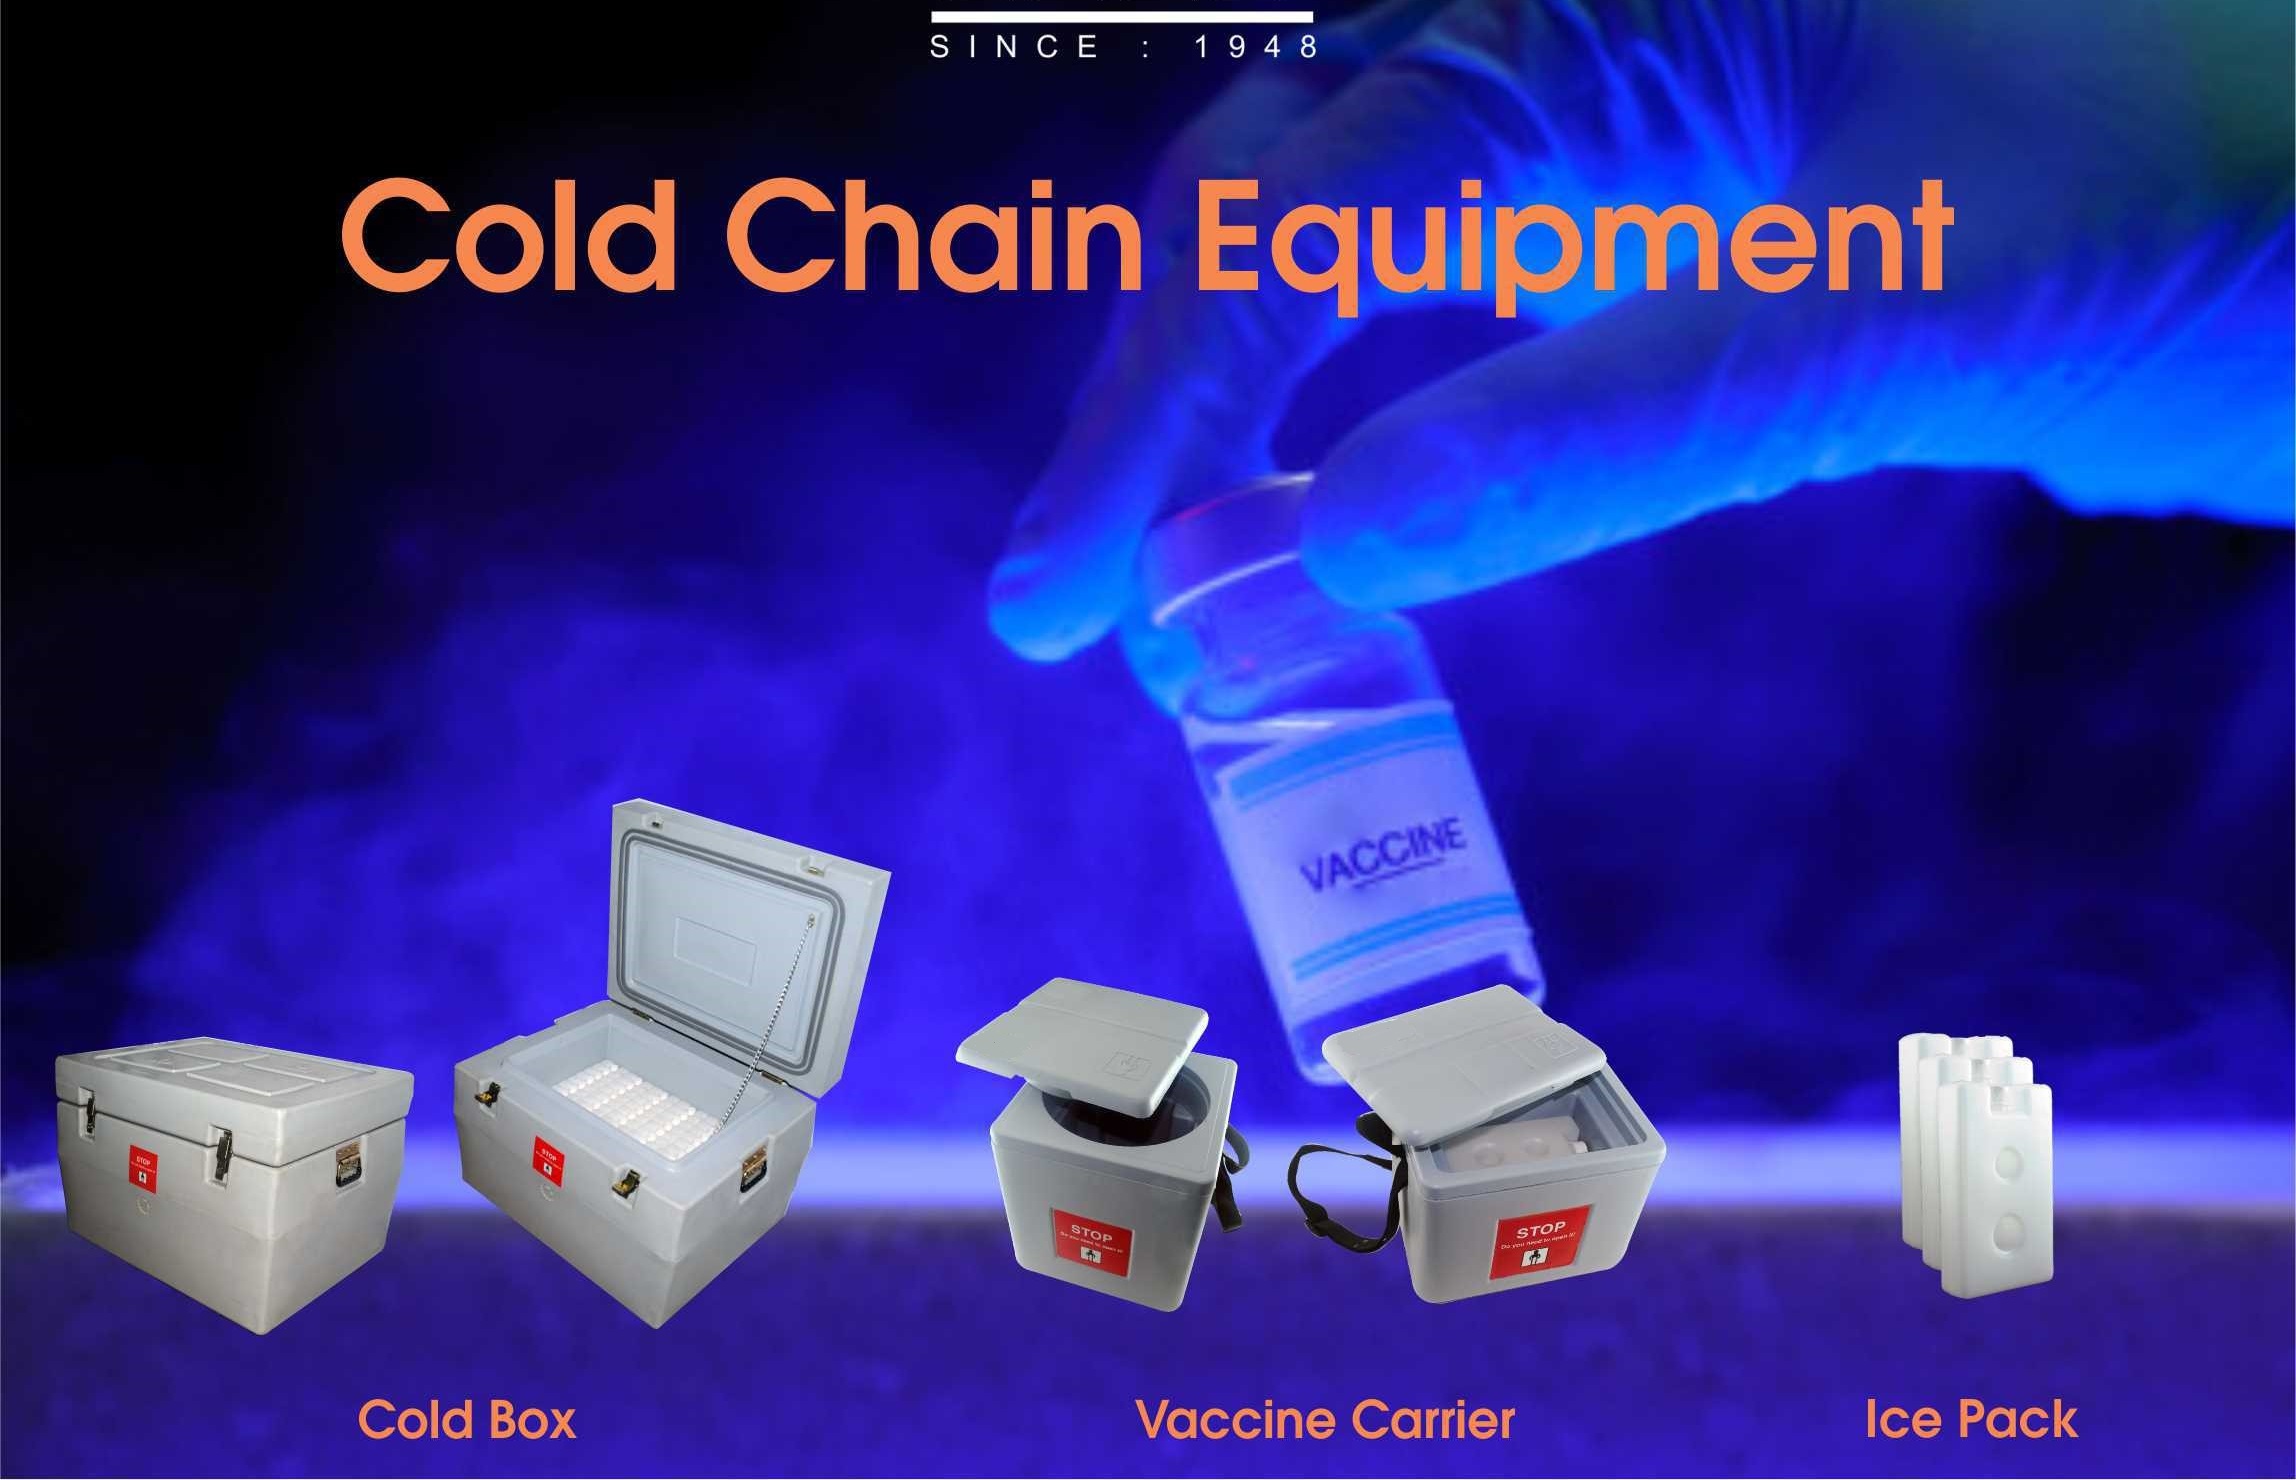 Electro-medical Equipment, Anesthesia Equipment & Ventilators, Cold Chain Equipment made in India